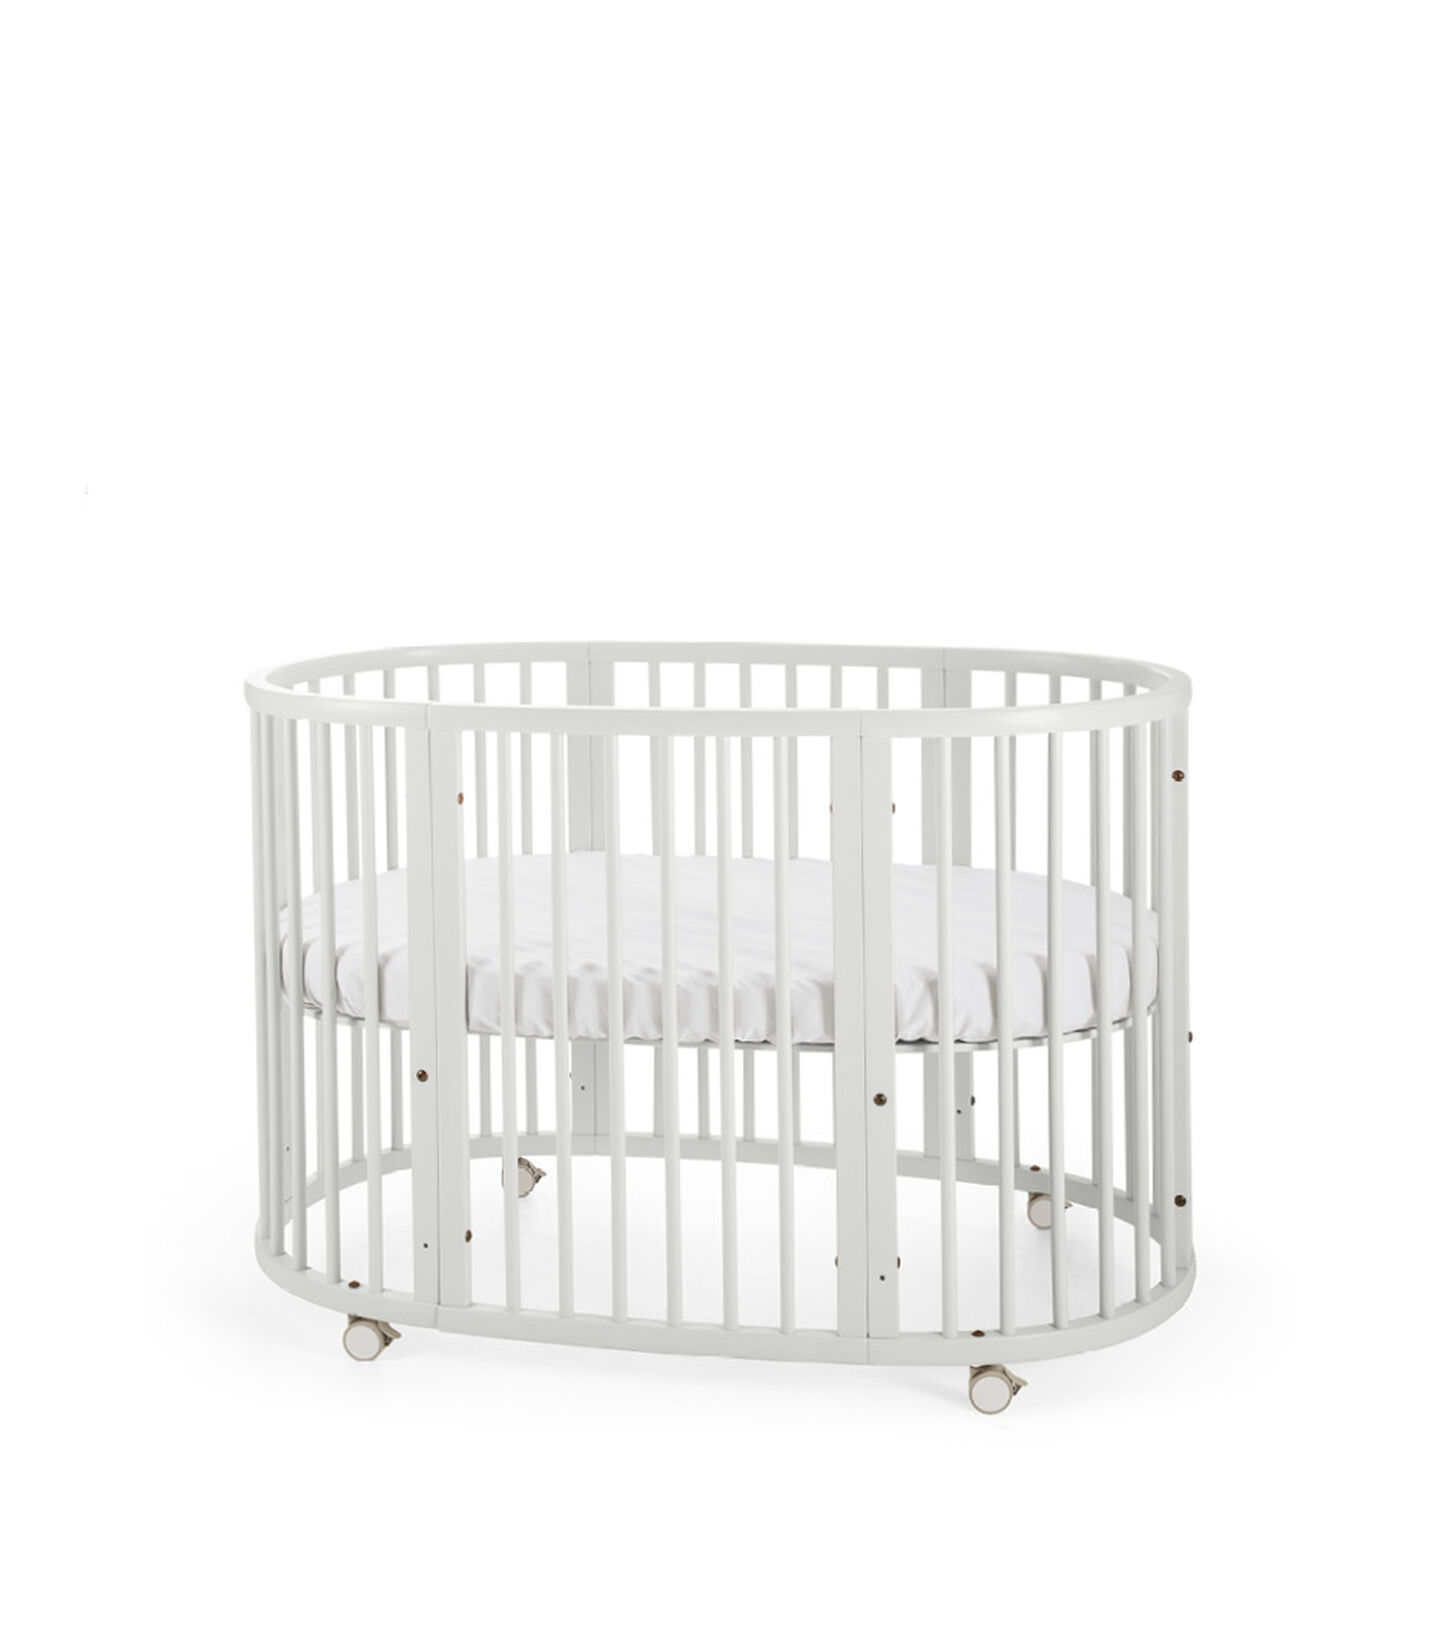 Stokke® Sleepi™ Bed Extension Белый, Белый, mainview view 3